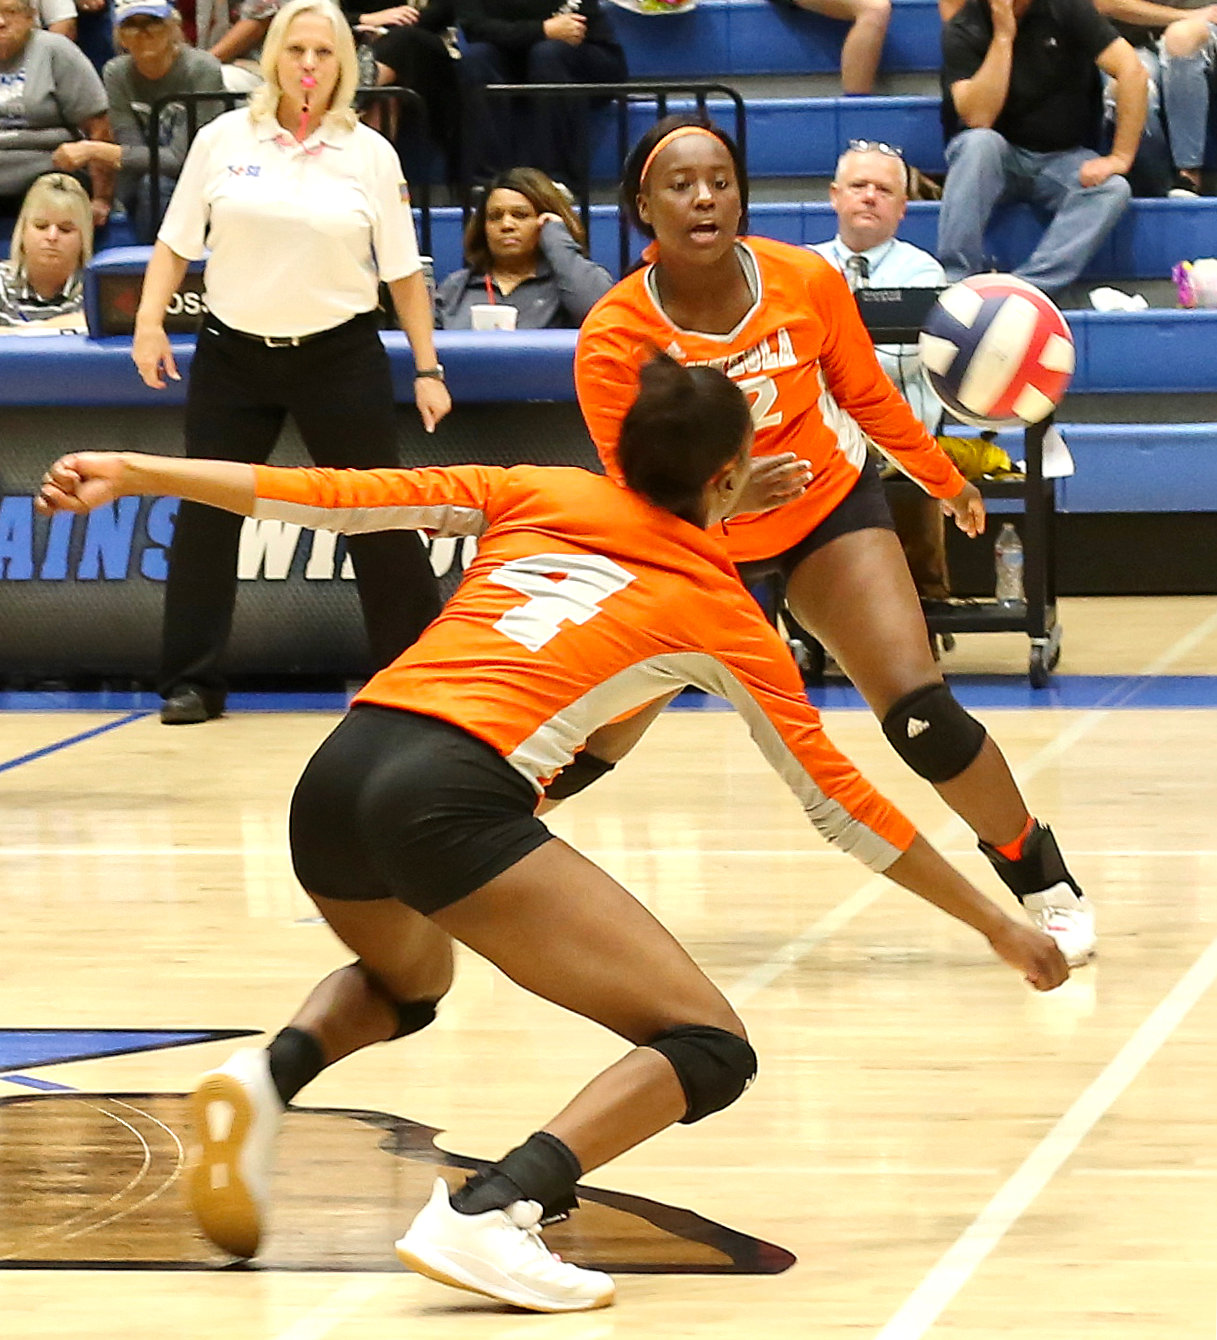 Mineola’s Tahjae Black and Tiara Stephens react to a drop shot in action against Rains.